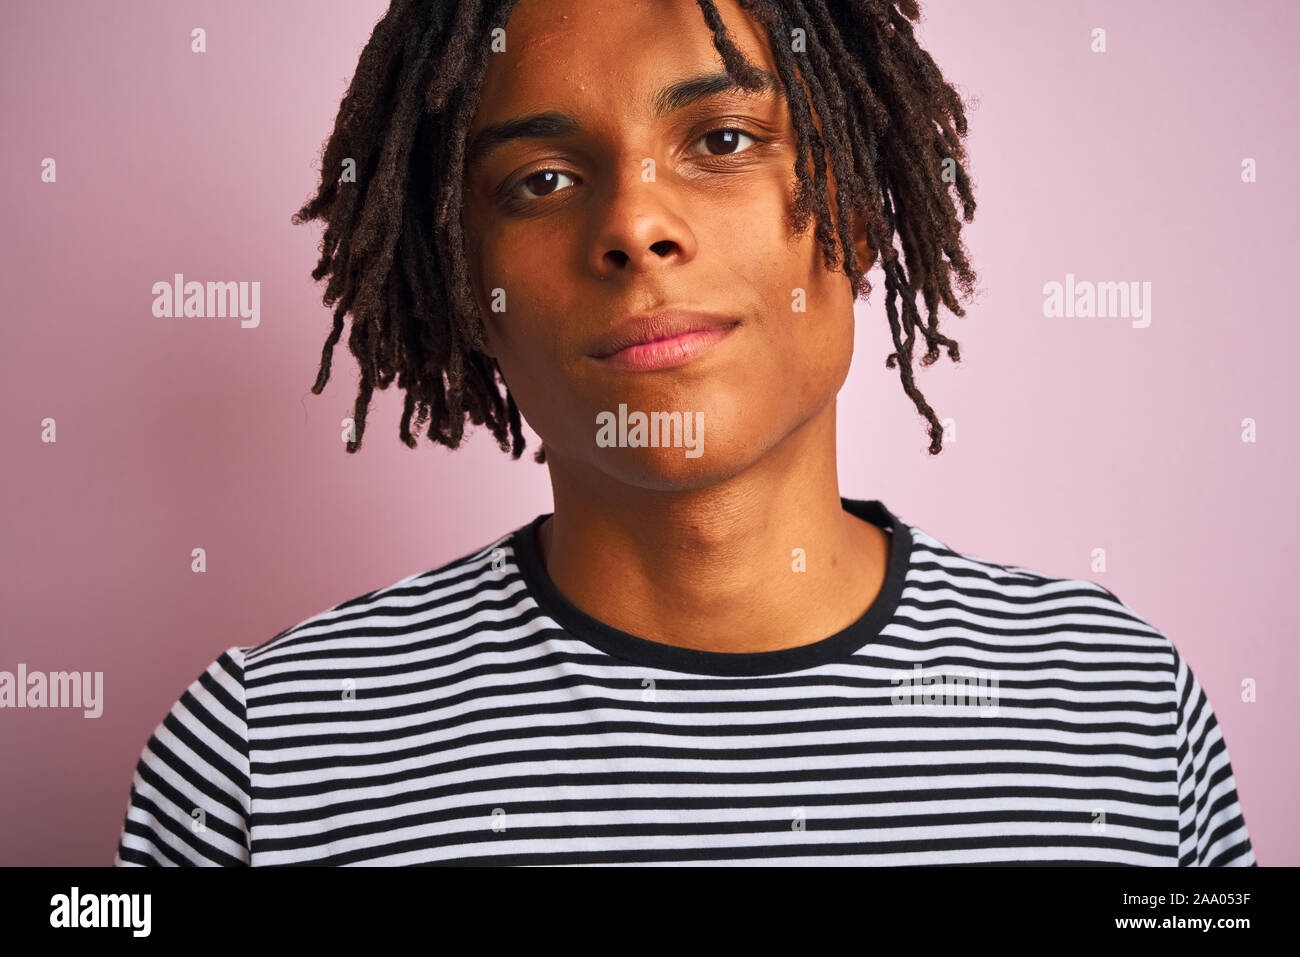 Afro American Man With Dreadlocks Wearing Navy Striped T